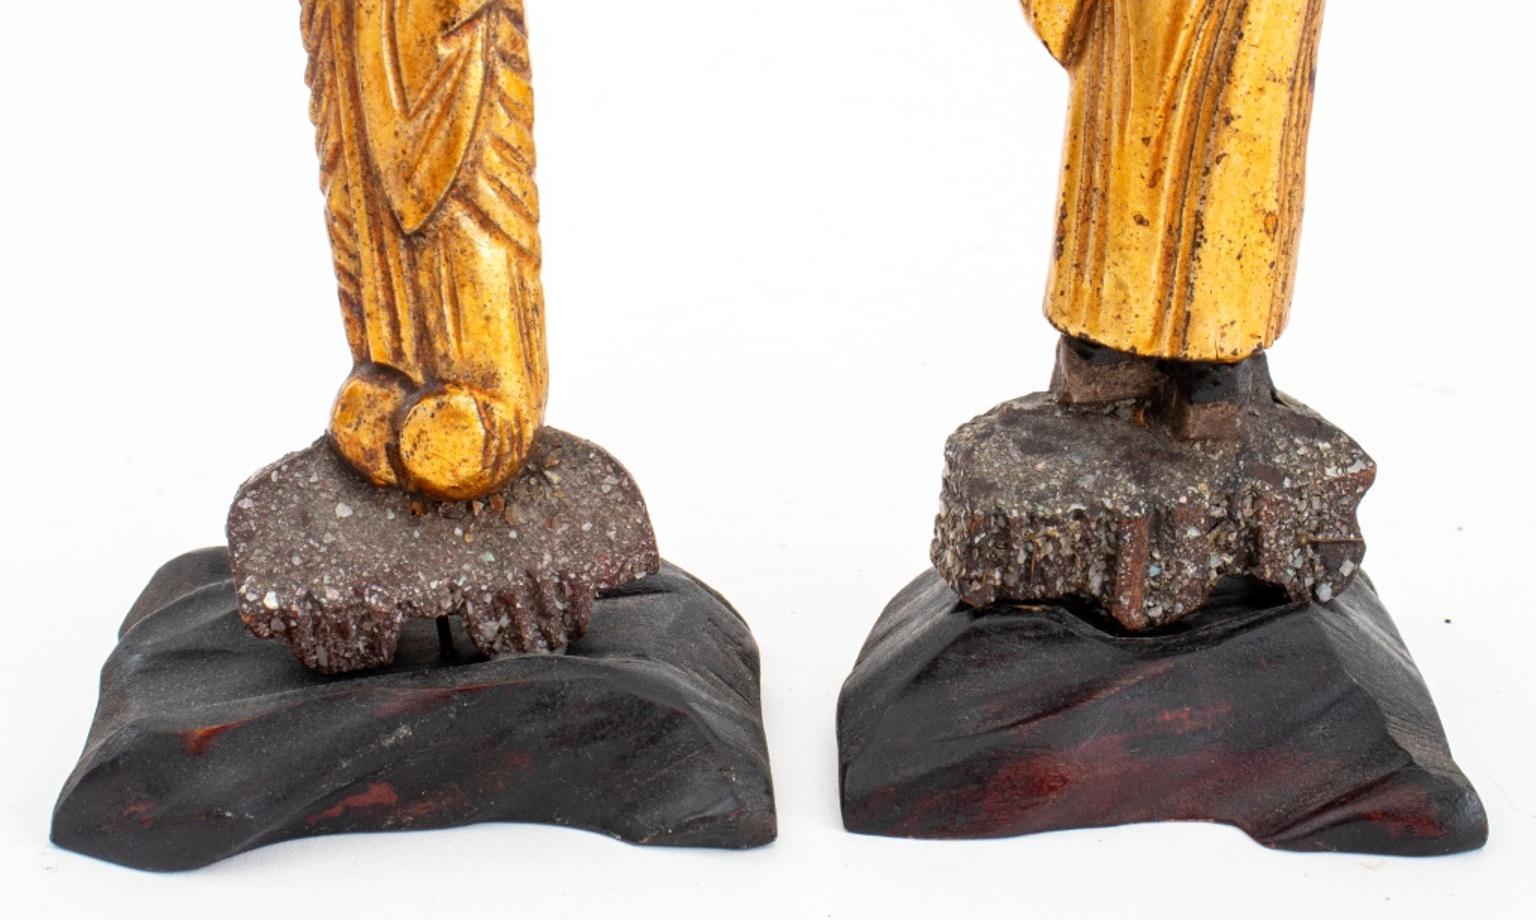 Hand-Carved Chinese Carved Wood Warrior Figure Sculpture, Pair